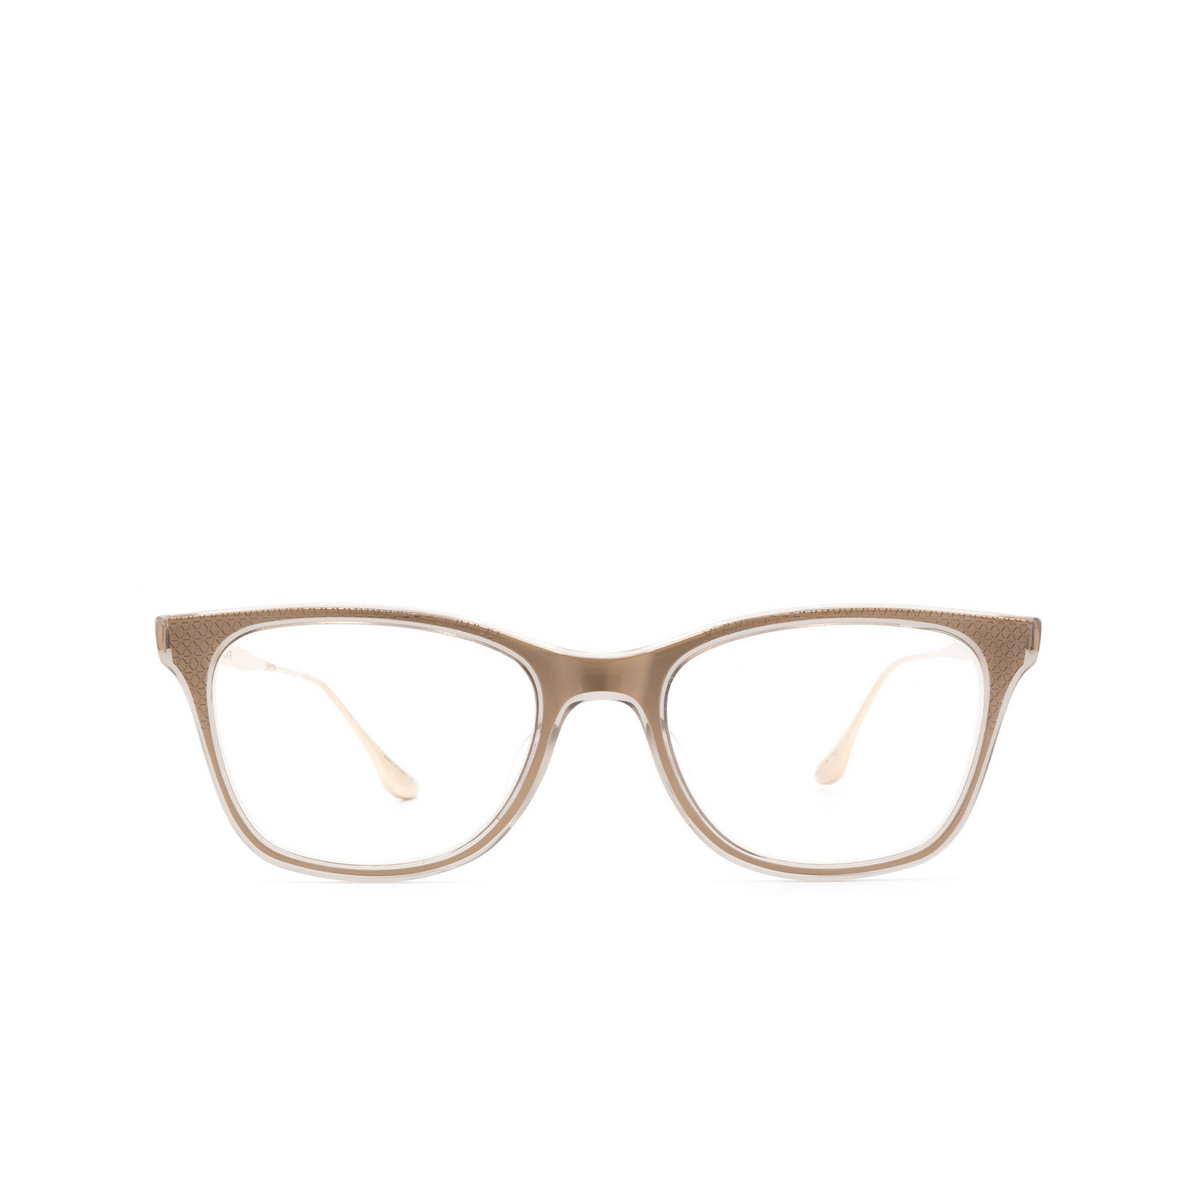 Dita® Cat-eye Eyeglasses: DTX505 color Gry-gld - front view.